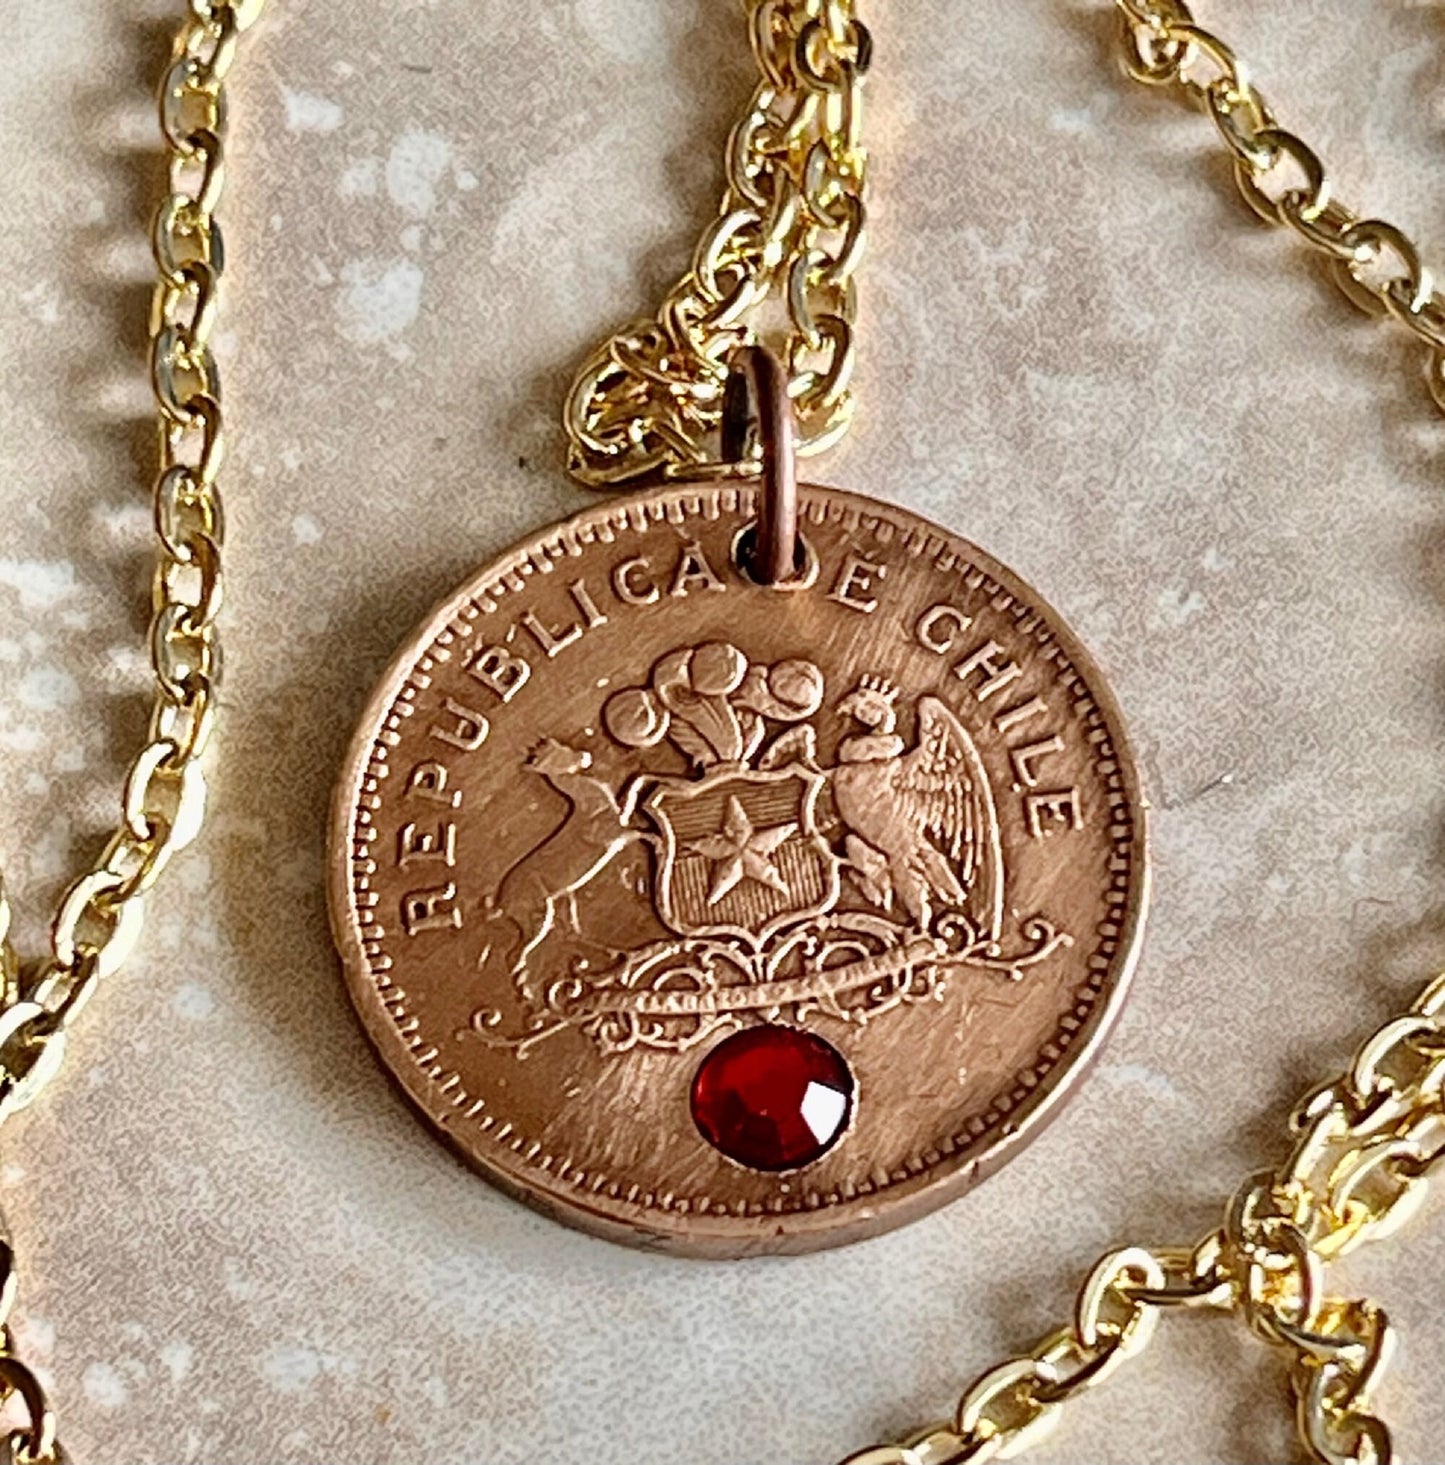 Chile Coin Necklace Chillan 100 Pesos Coin Rhinestone Pendant Custom For Gift For Friend Coin Gift For Him, Her, Coin Collector, World Coins